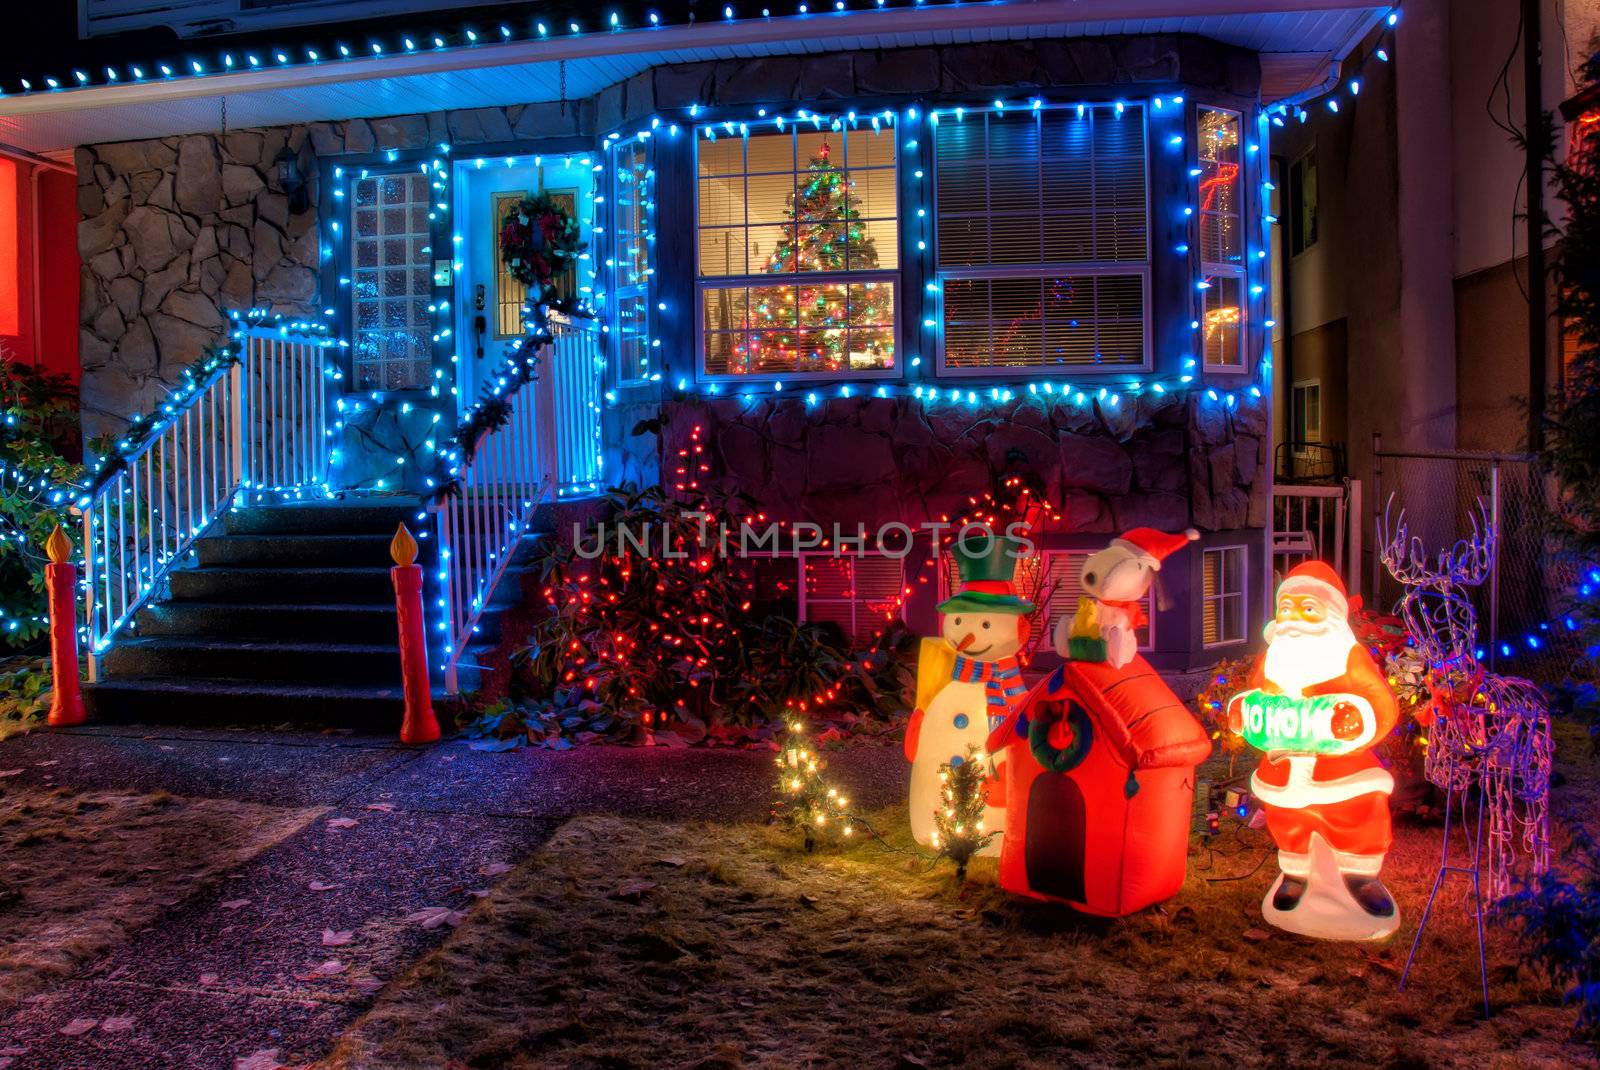 House Decorated with Christmas Lights by JamesWheeler